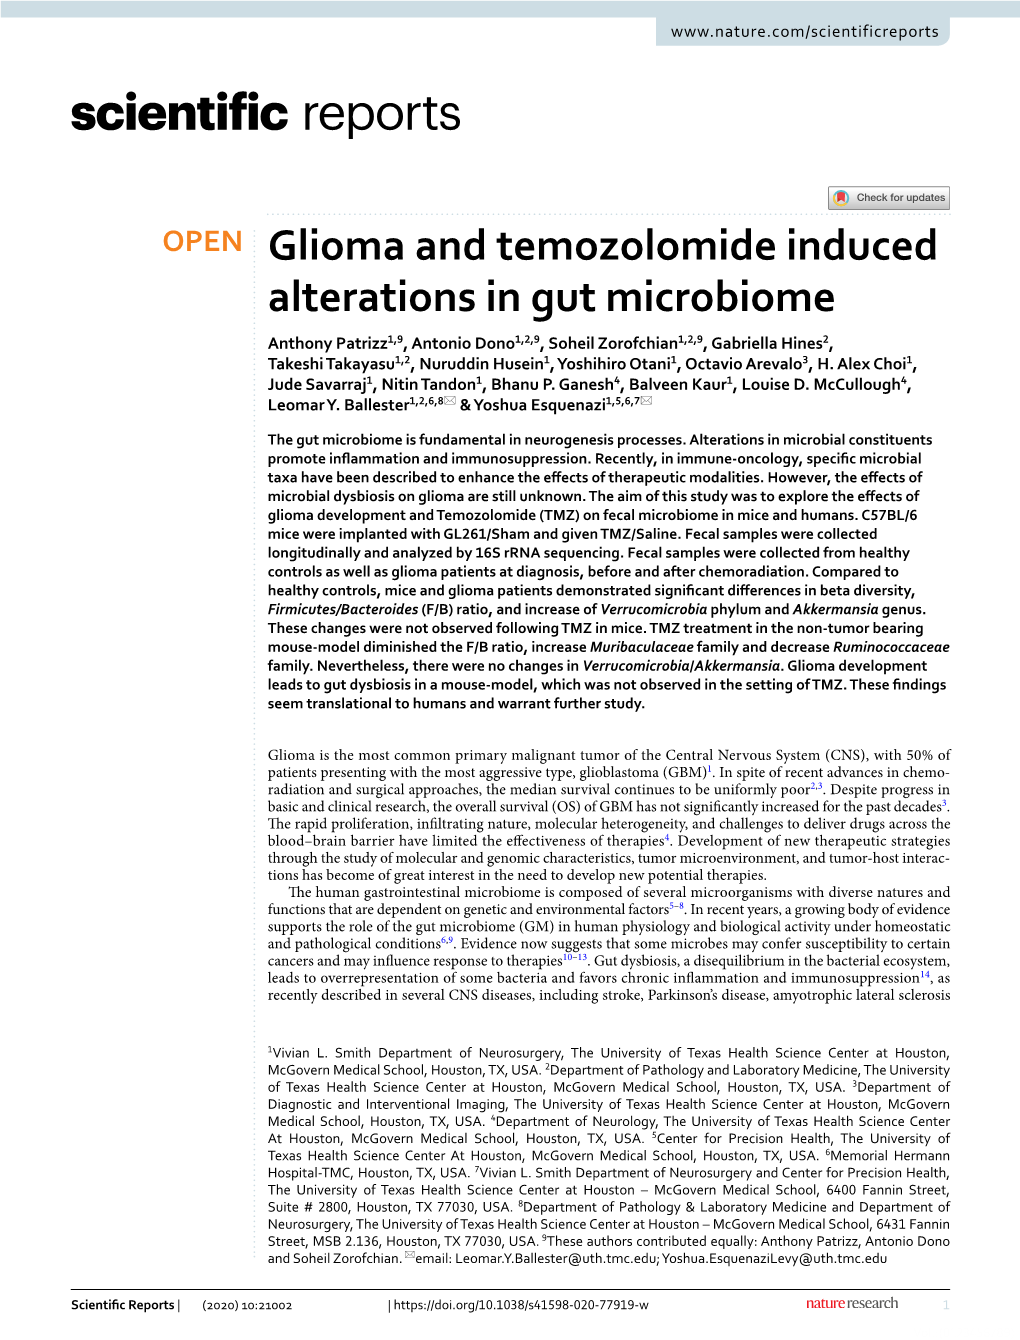 Glioma and Temozolomide Induced Alterations in Gut Microbiome